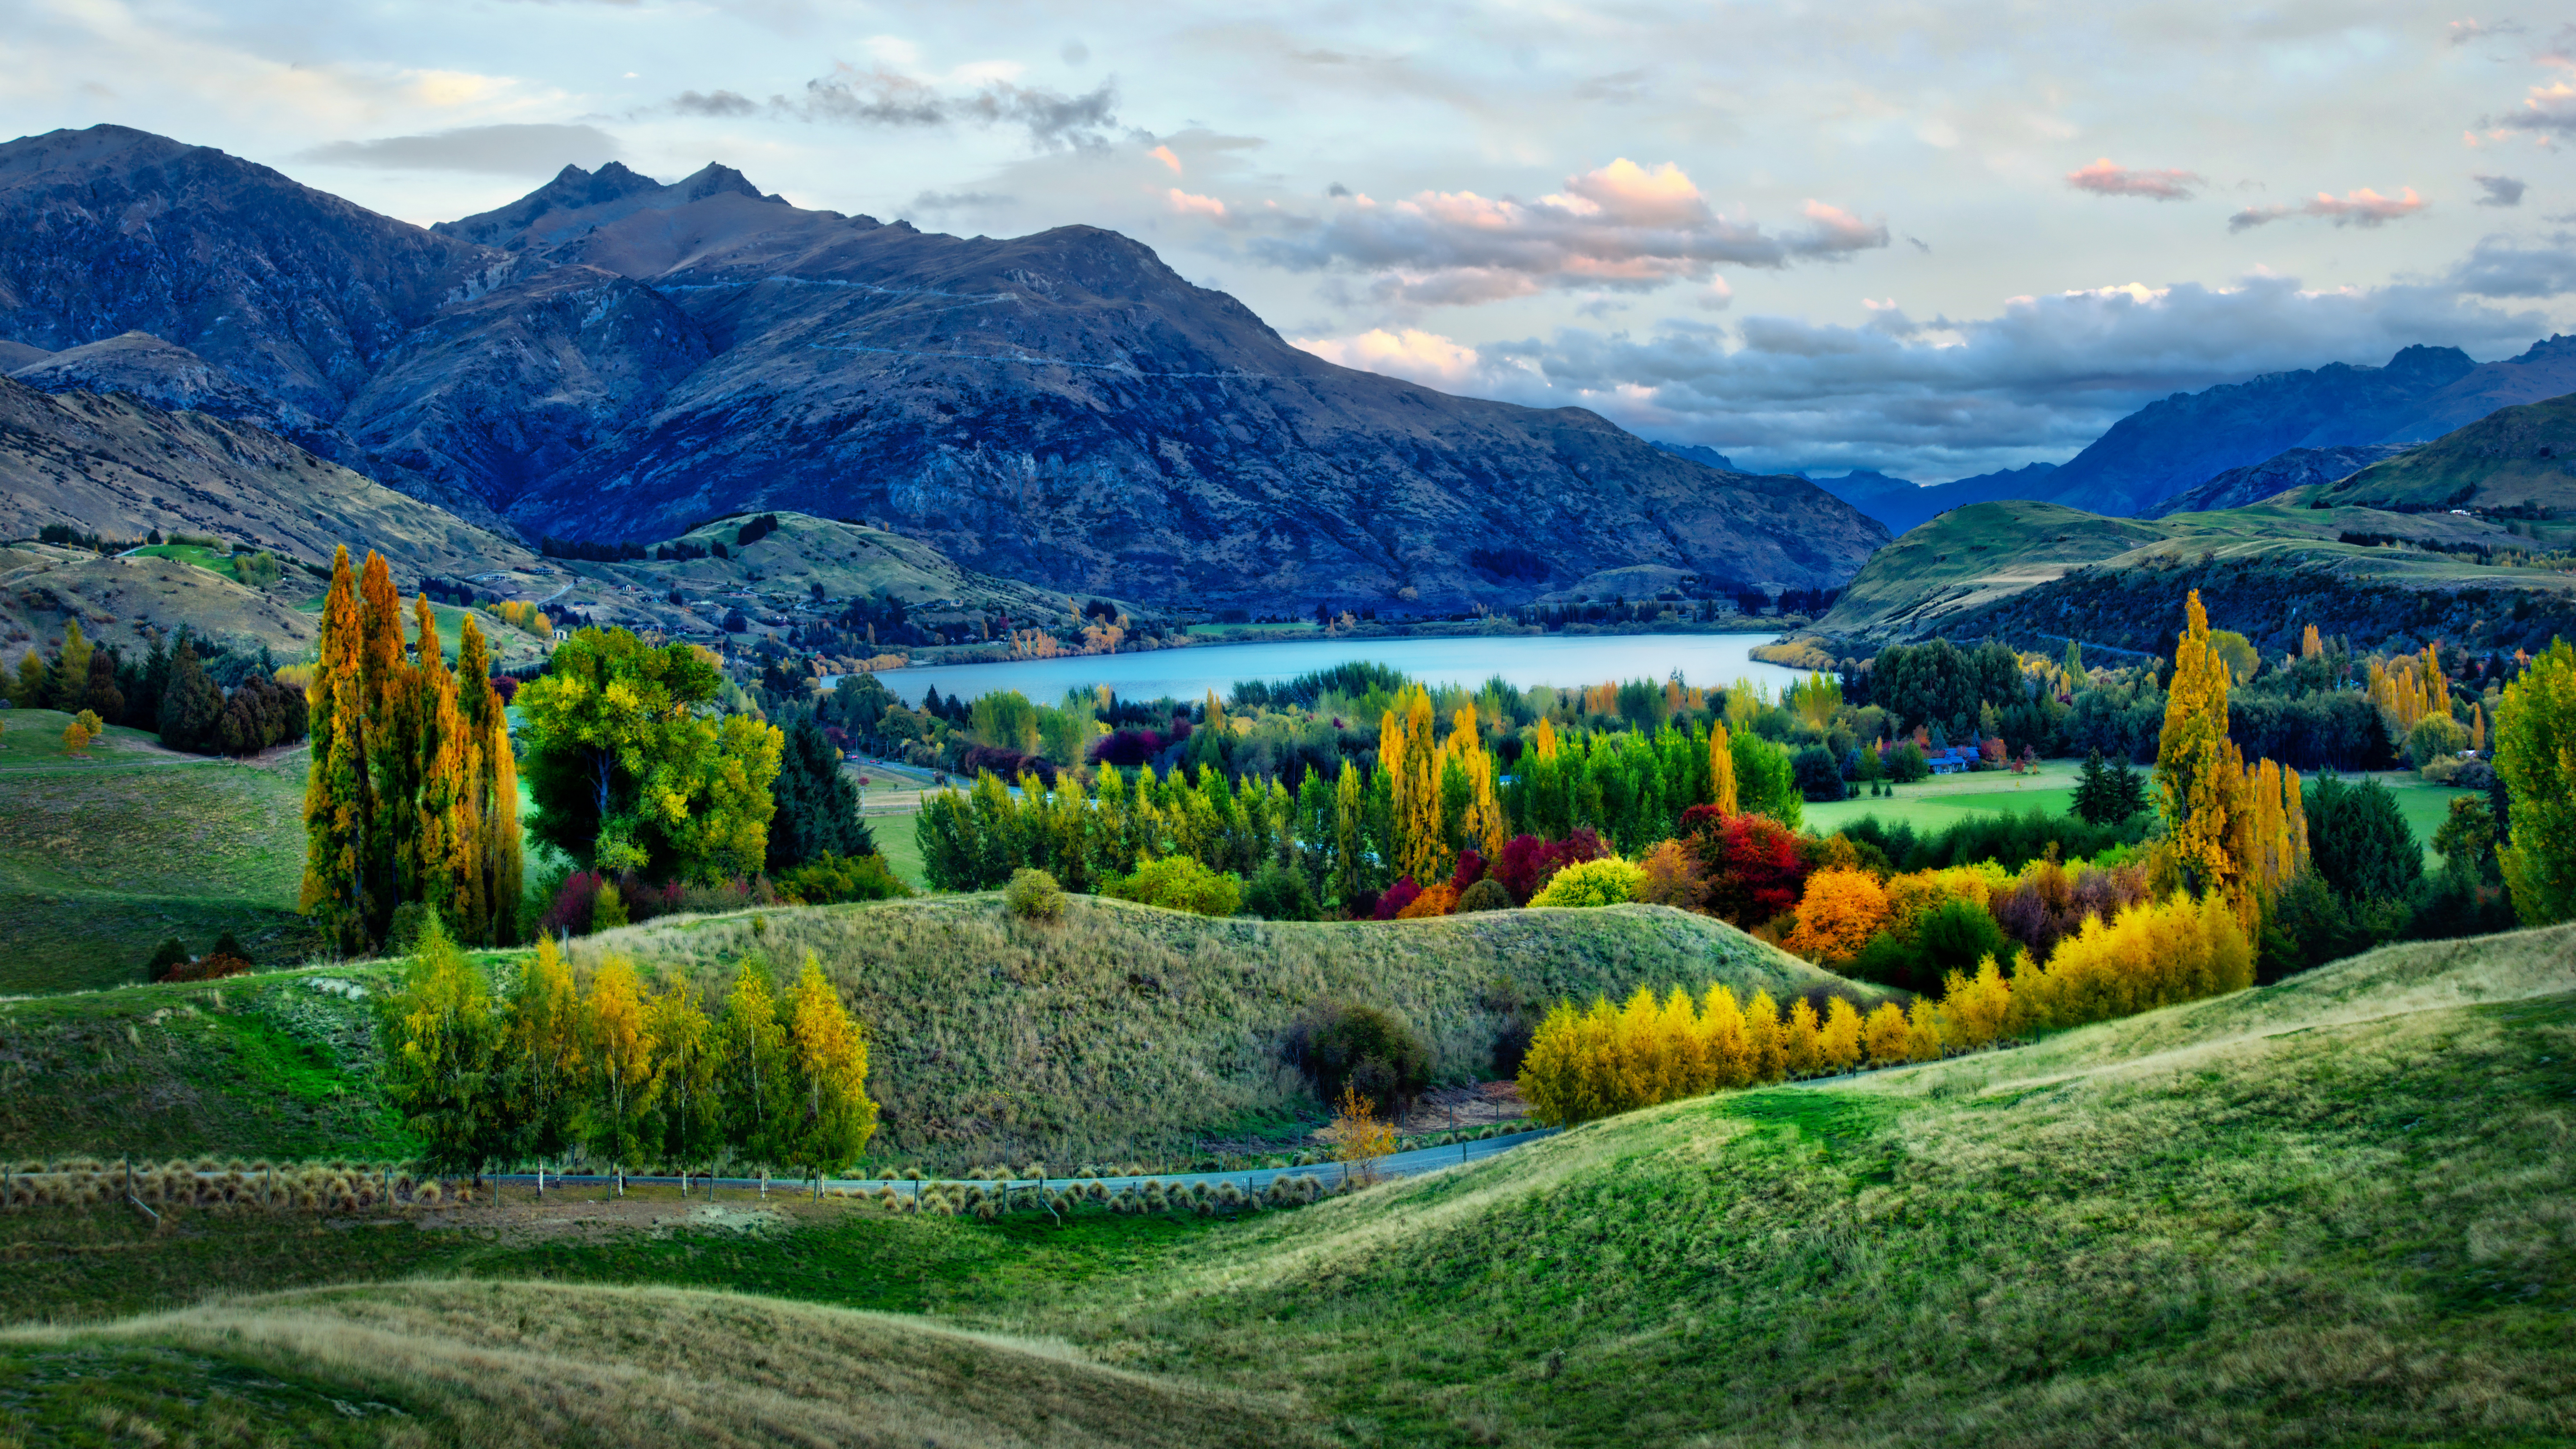 General 7680x4320 Trey Ratcliff New Zealand Queenstown nature trees mountains water clouds landscape